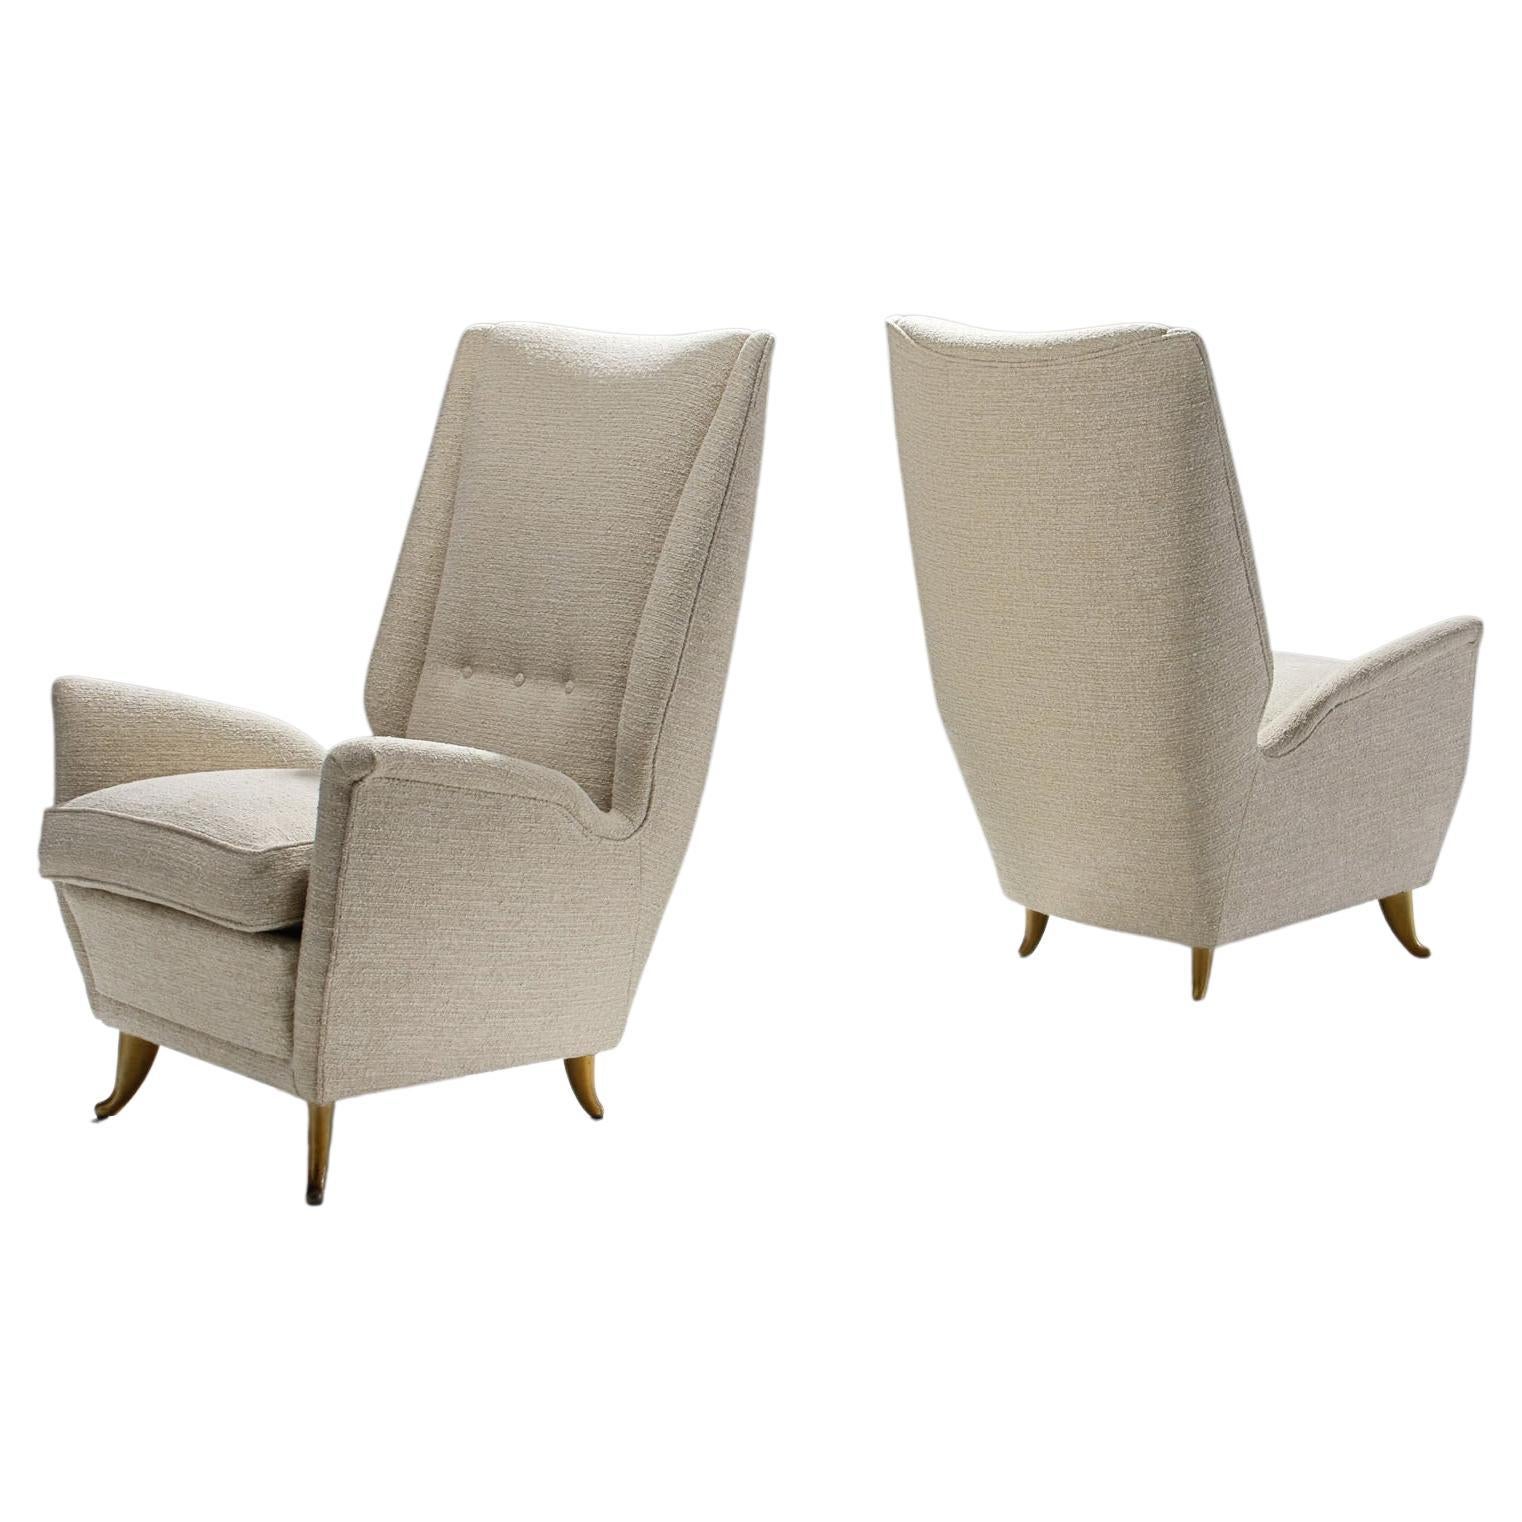 Pair of Lounge Chairs Attributed to Gio Ponti for ISA Bergamo, Italy 1950s For Sale